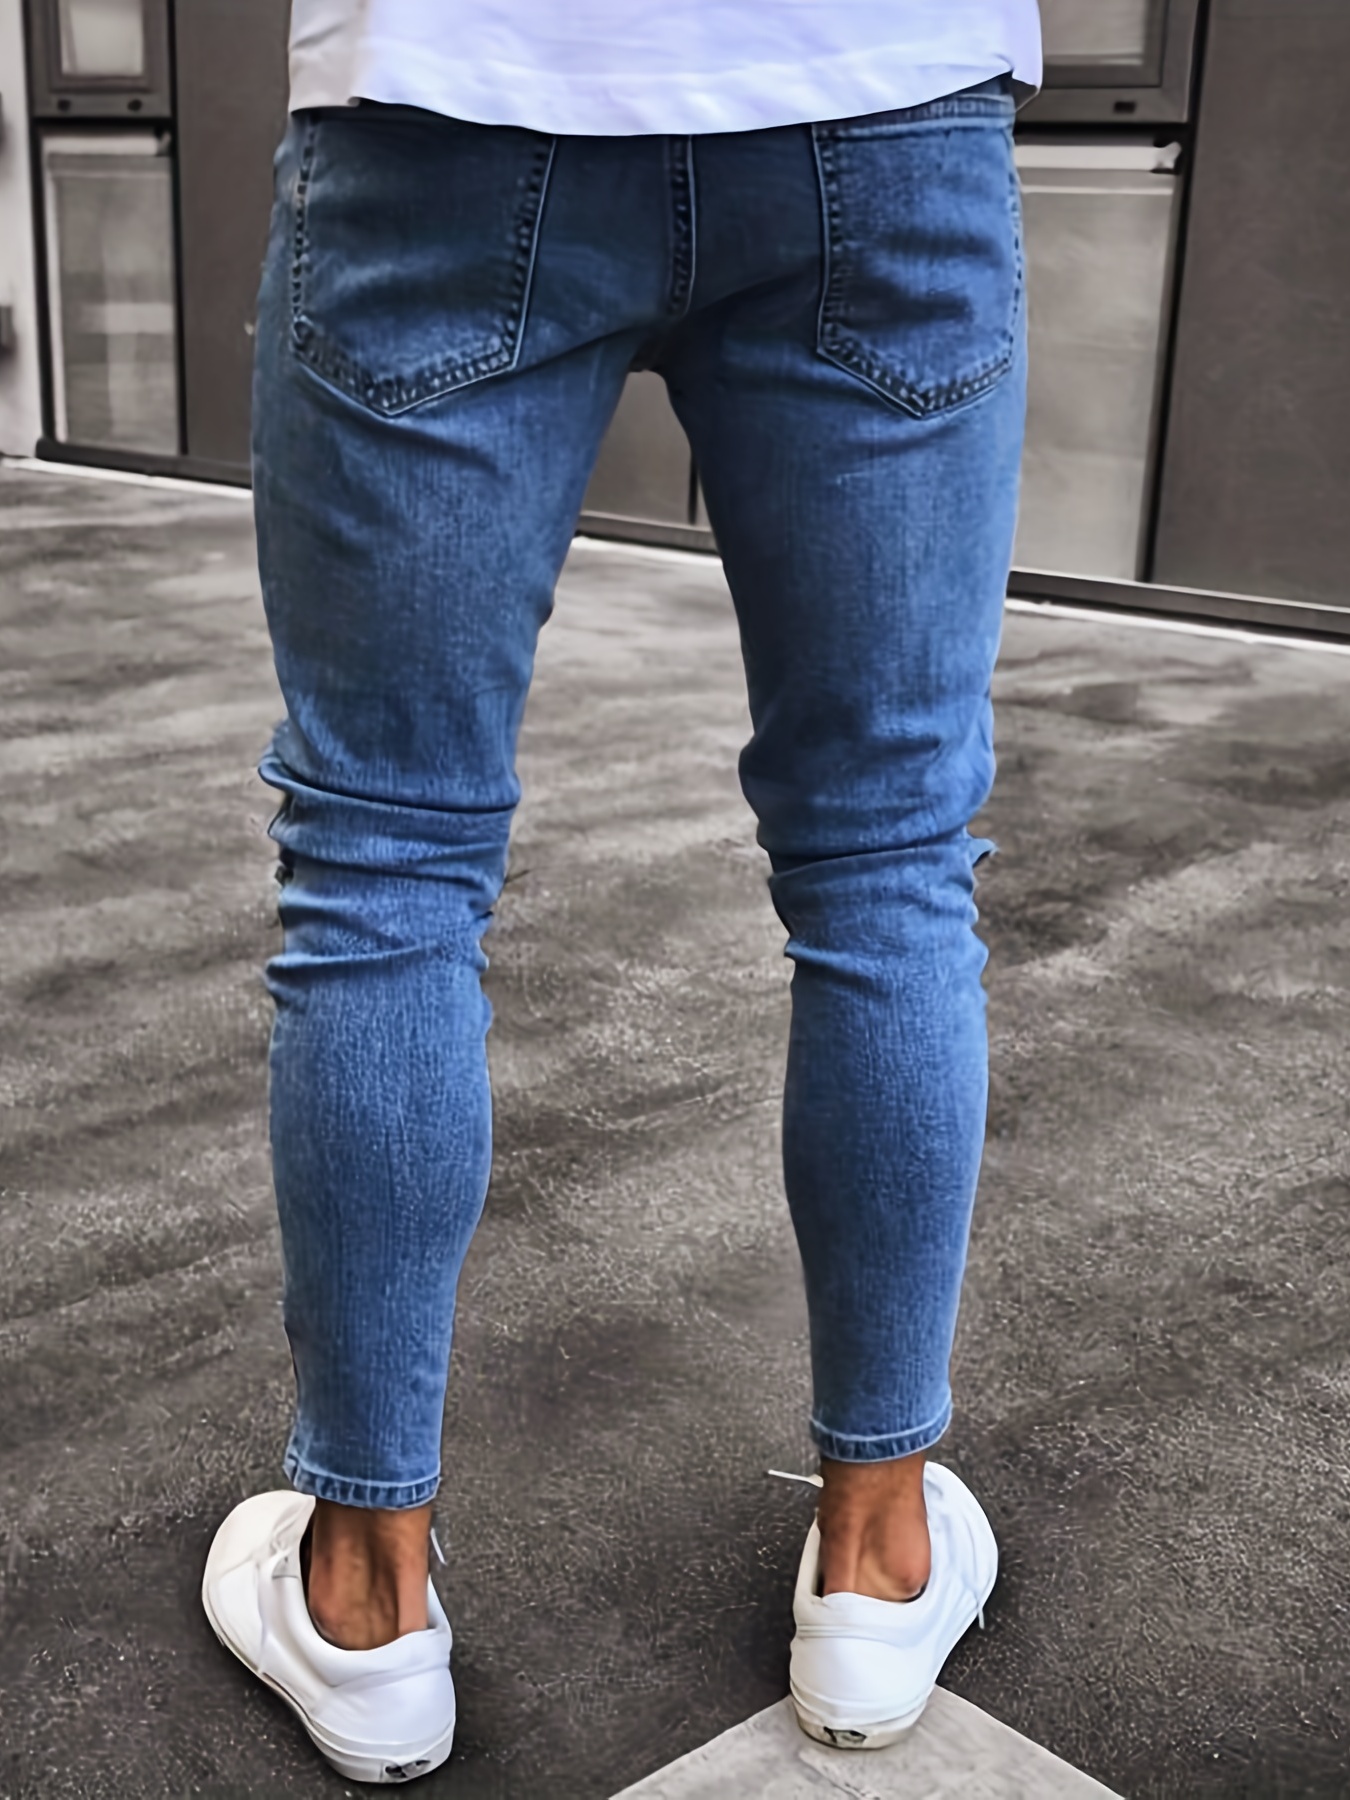 Ruined Plus Size Mens Denim Fashion Nova Men Jeans With Tear Detailing  Trendy European And New Design For A Chic Look XX1013 From  Moncl_swear_store, $19.22